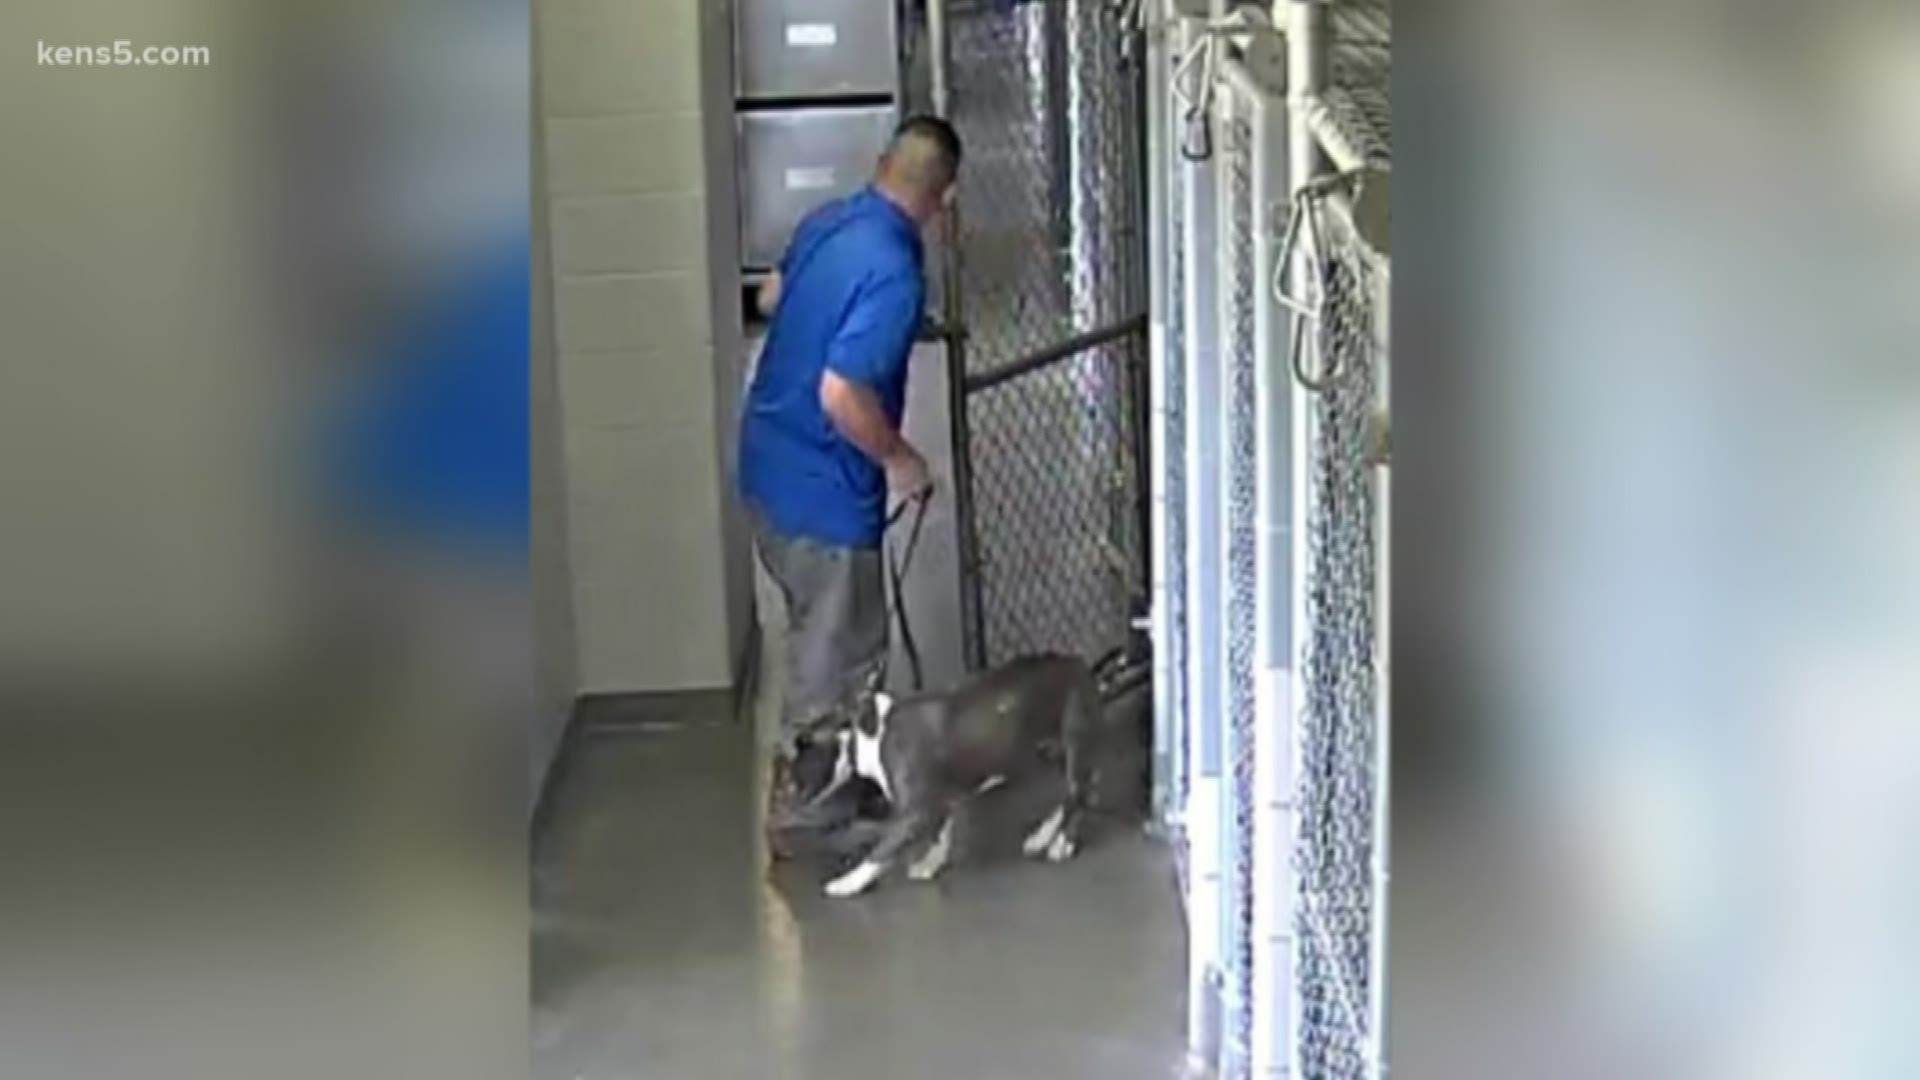 San Antonio Animal Care Services is asking for the public's help in identifying a man who walked out with a dog.